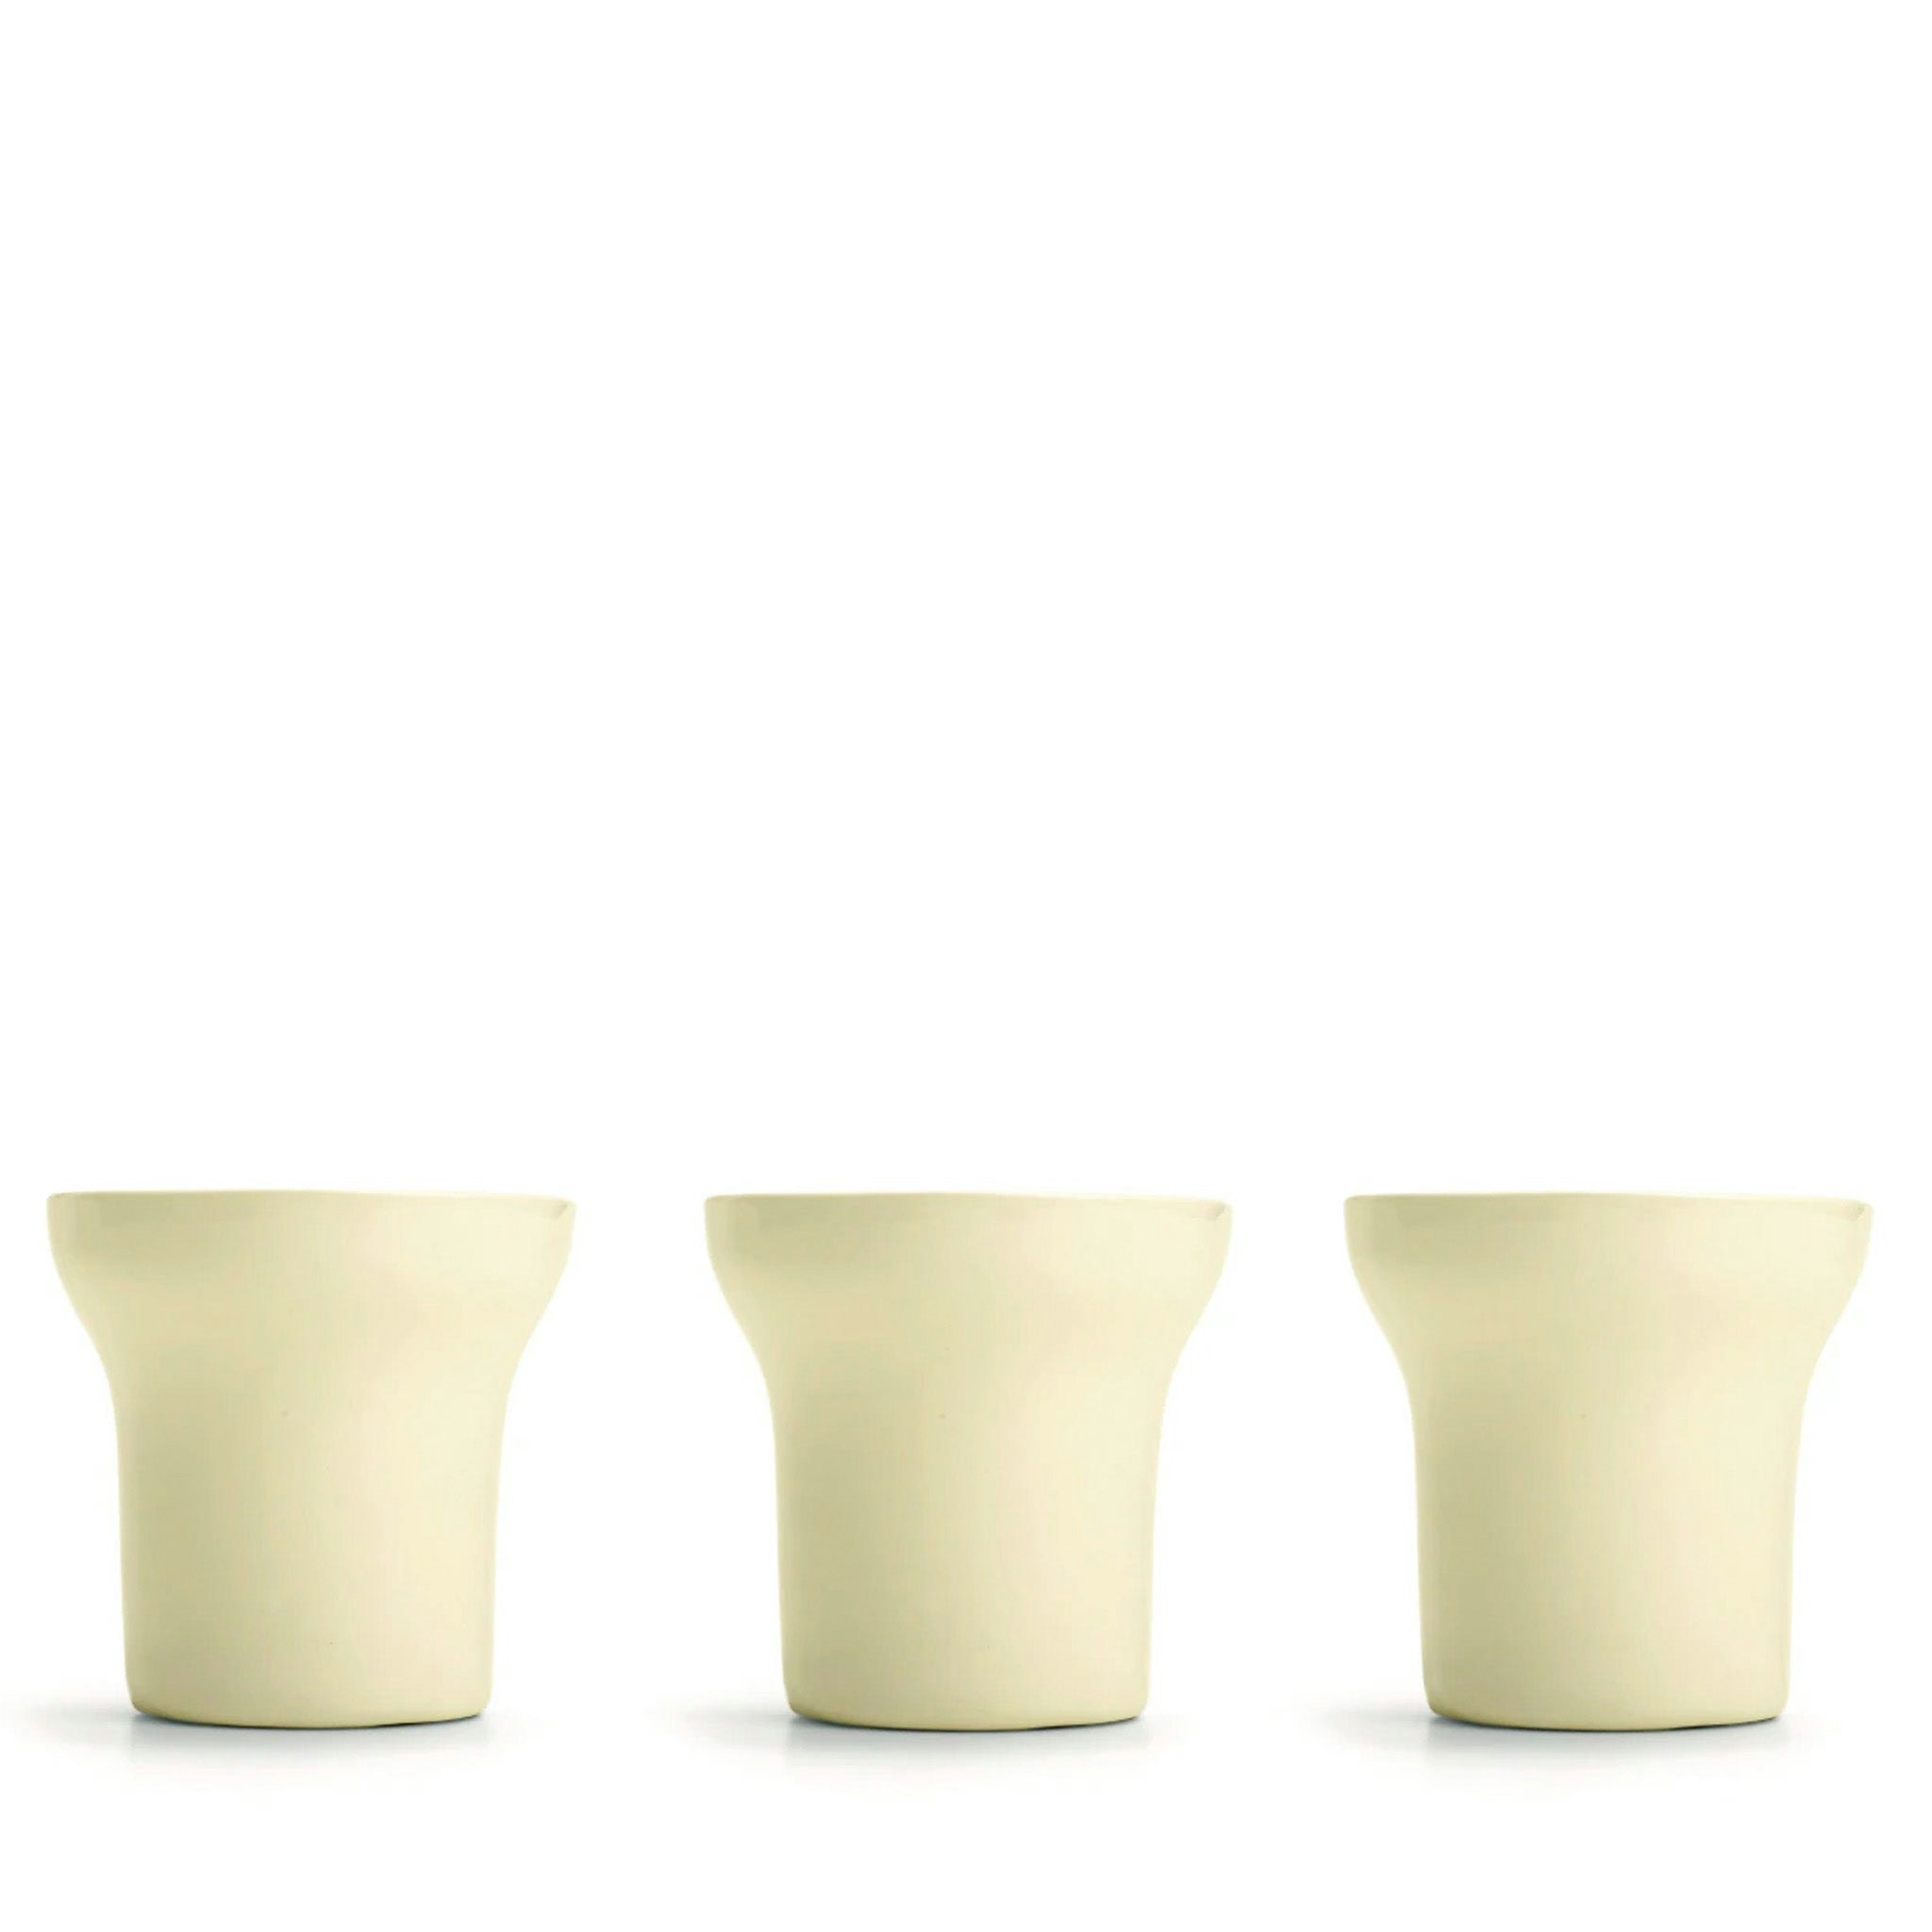 Goblet by John Pawson for When Objects Work